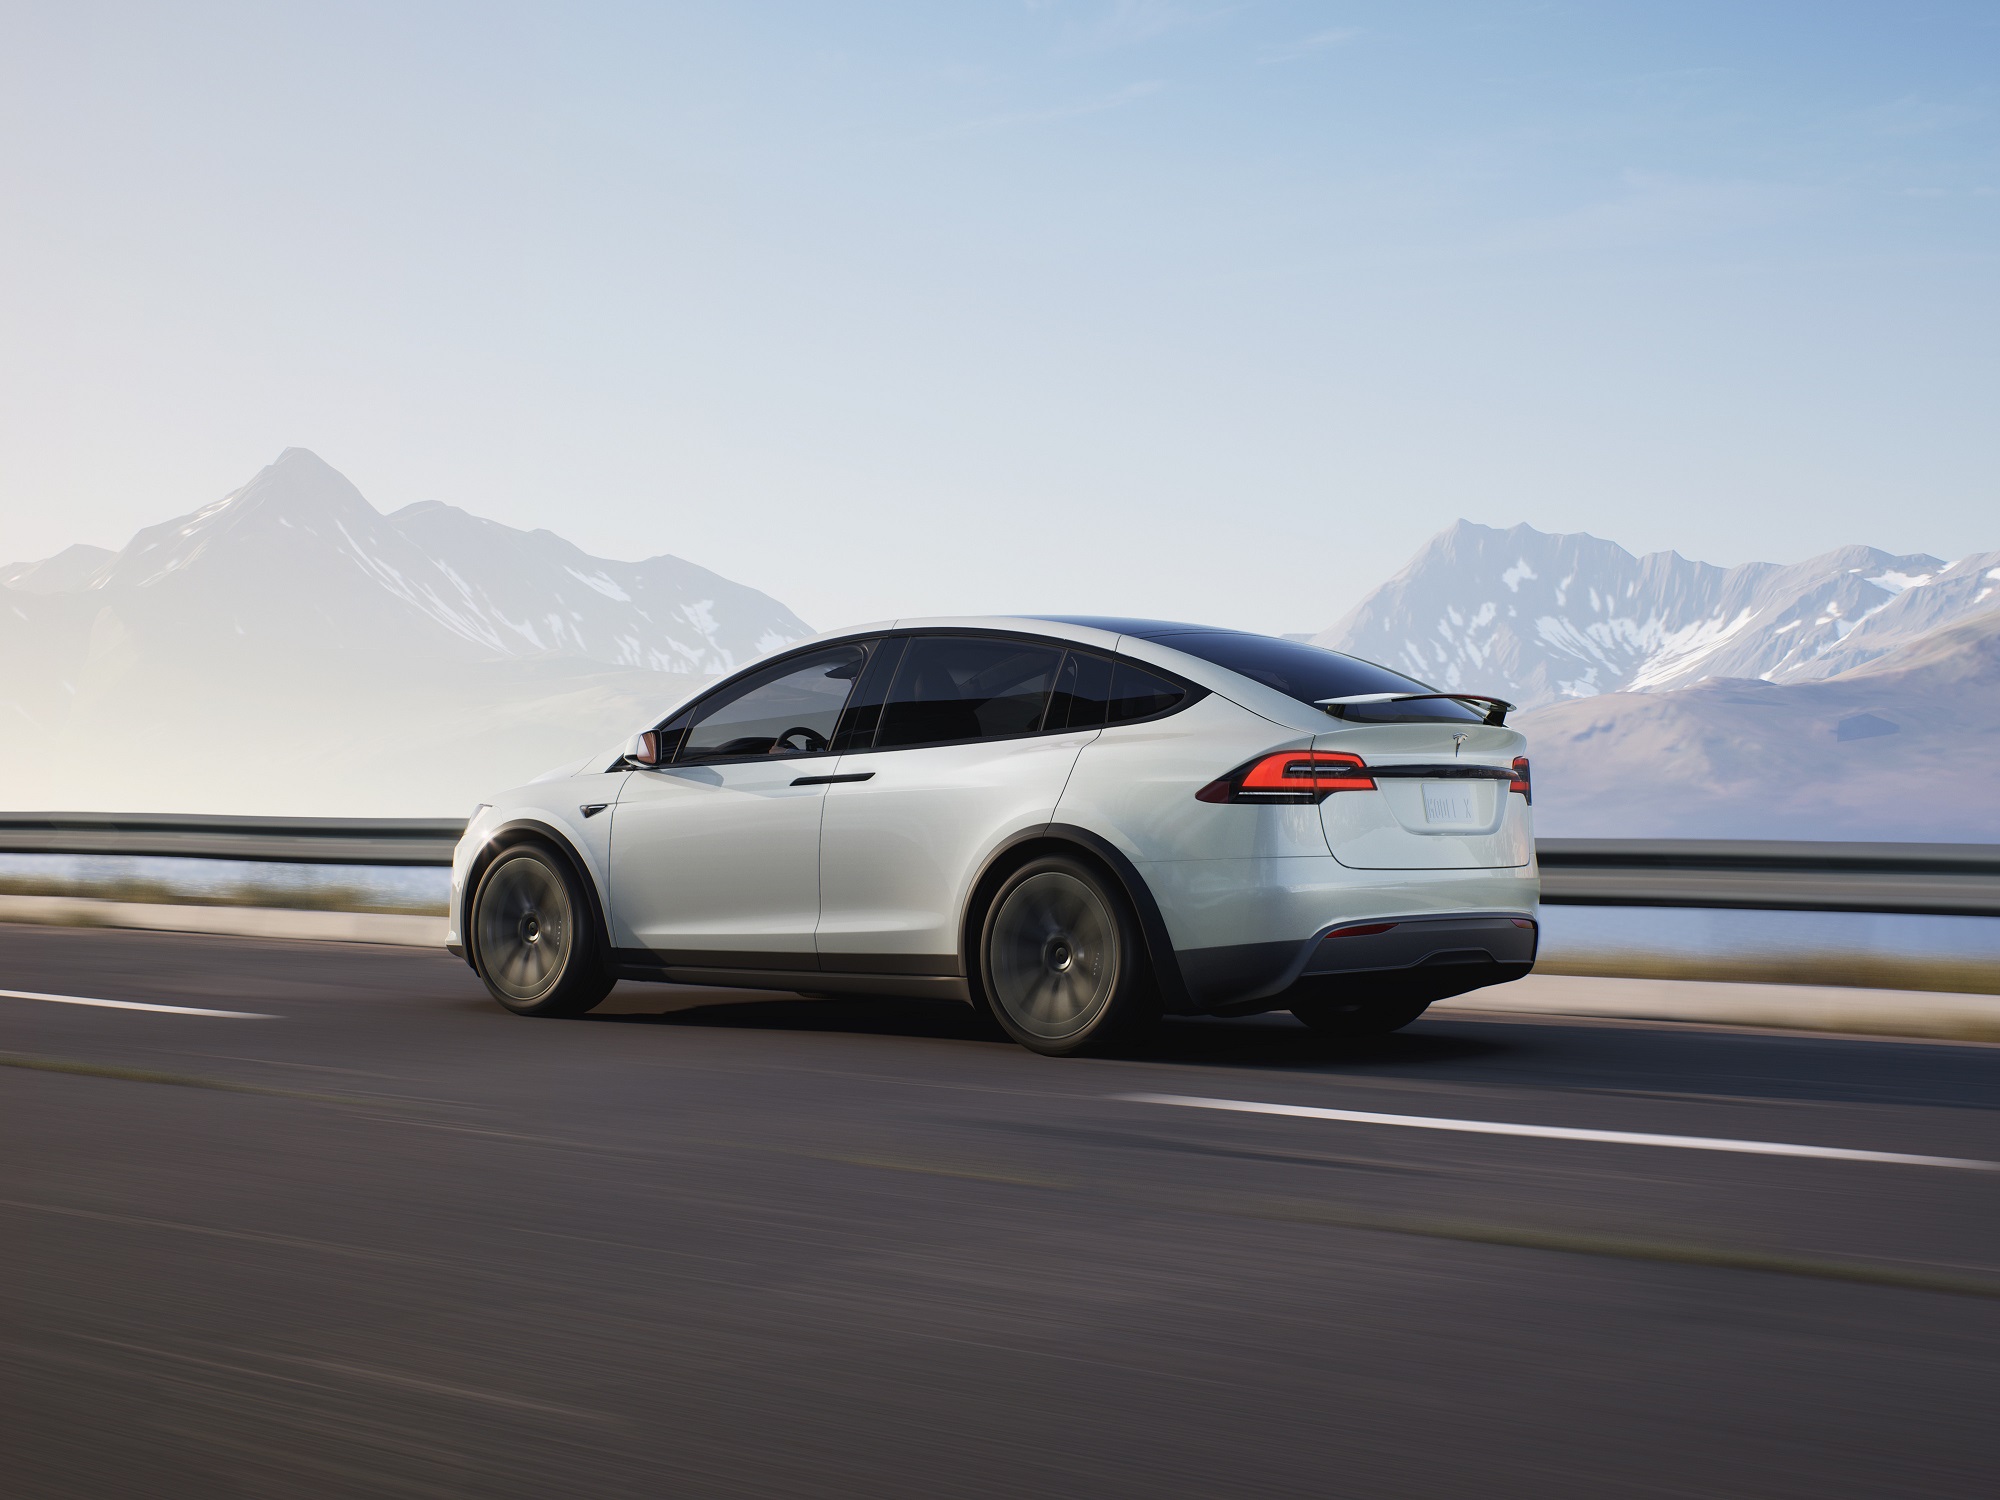 Tesla models like this Model X are electric cars with EV range that suffers in the cold.